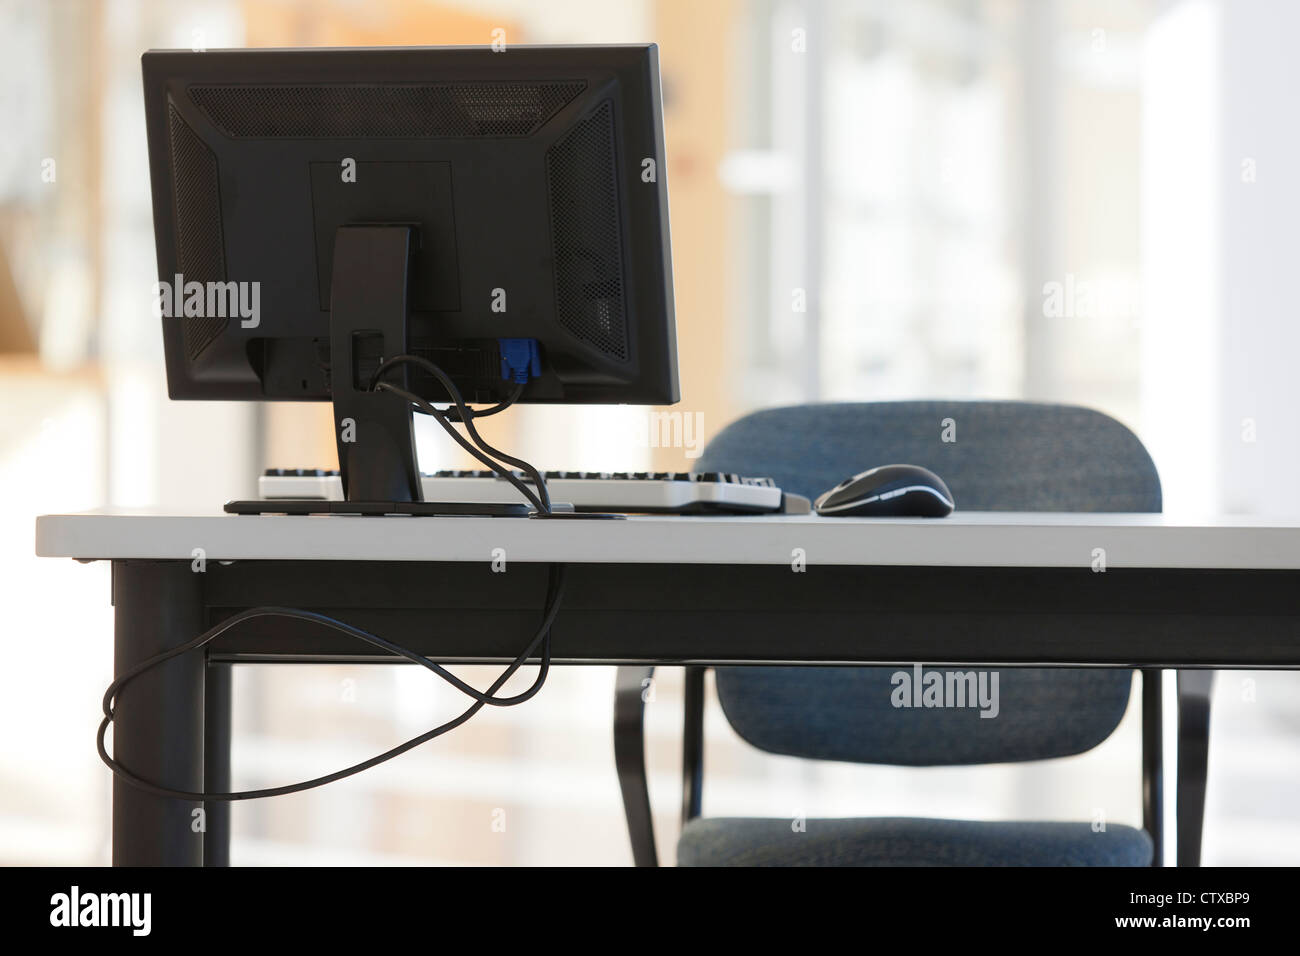 Computer equipment on desk with chair Stock Photo